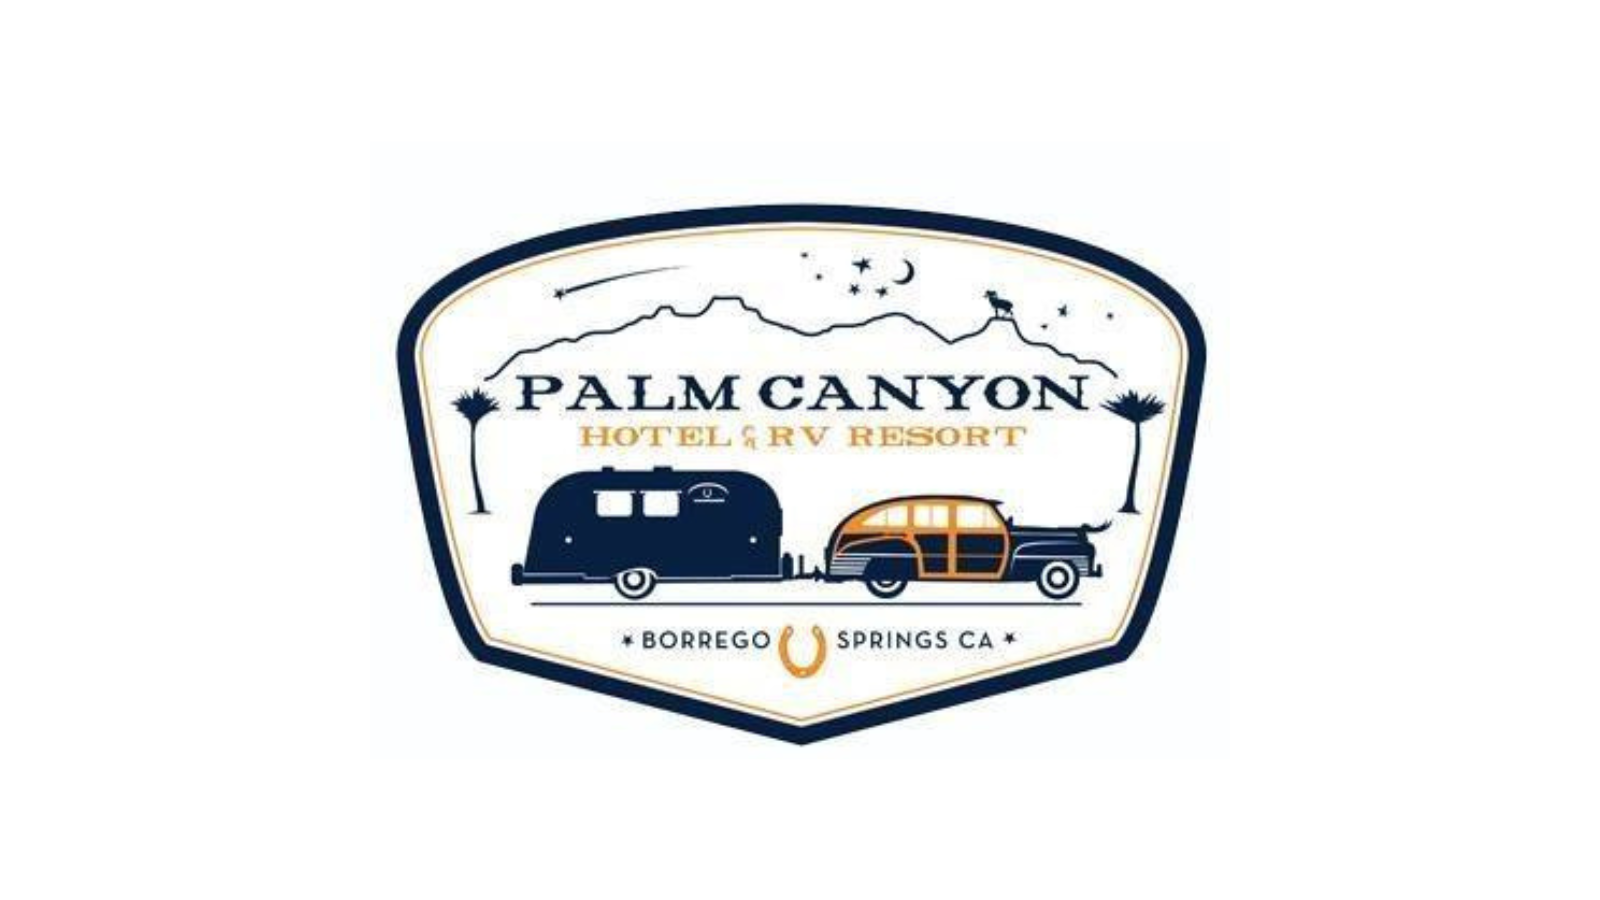 Palm Canyon Hotel and Resort
